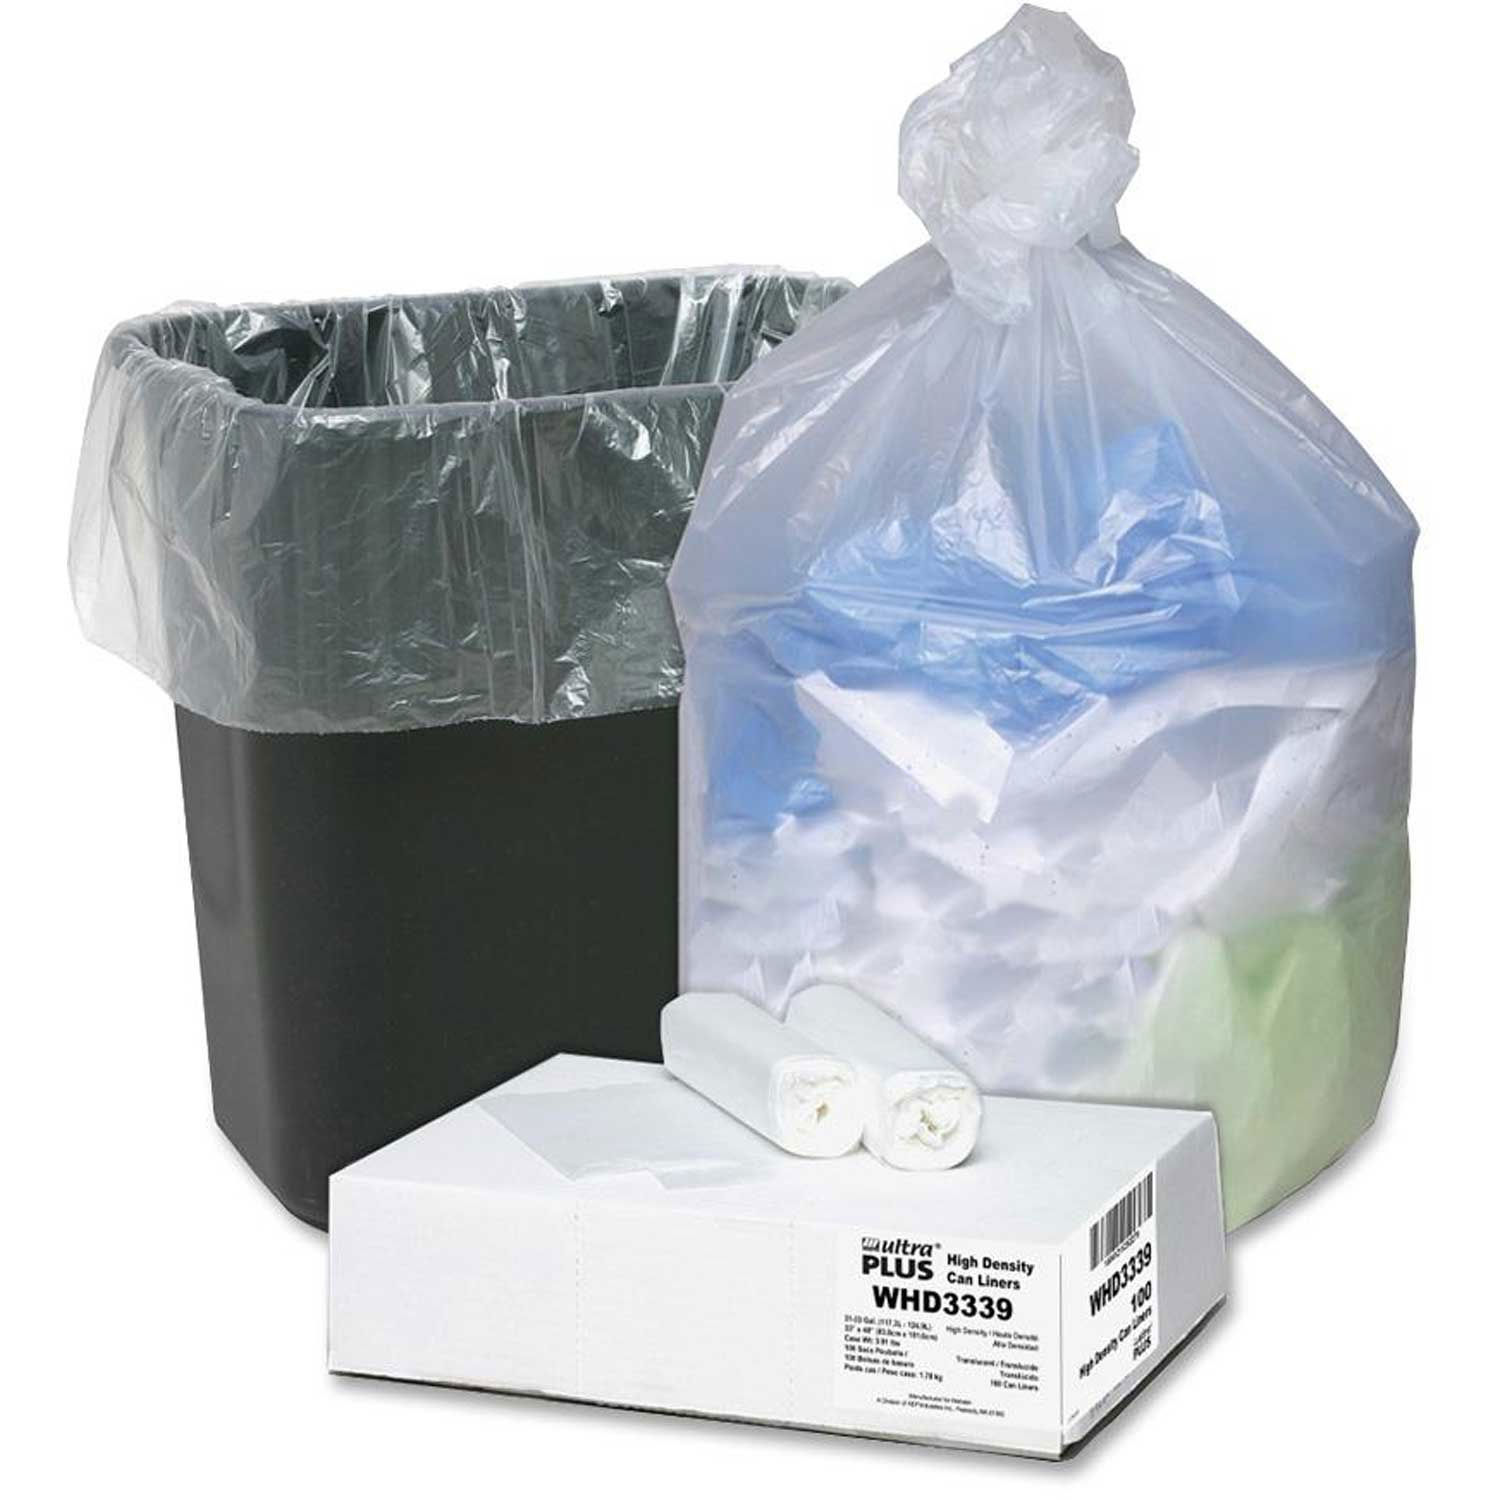 Webster Ultra Plus Trash Can Liners, Natural, 33 Gallon, 0.43 Mil | eBay